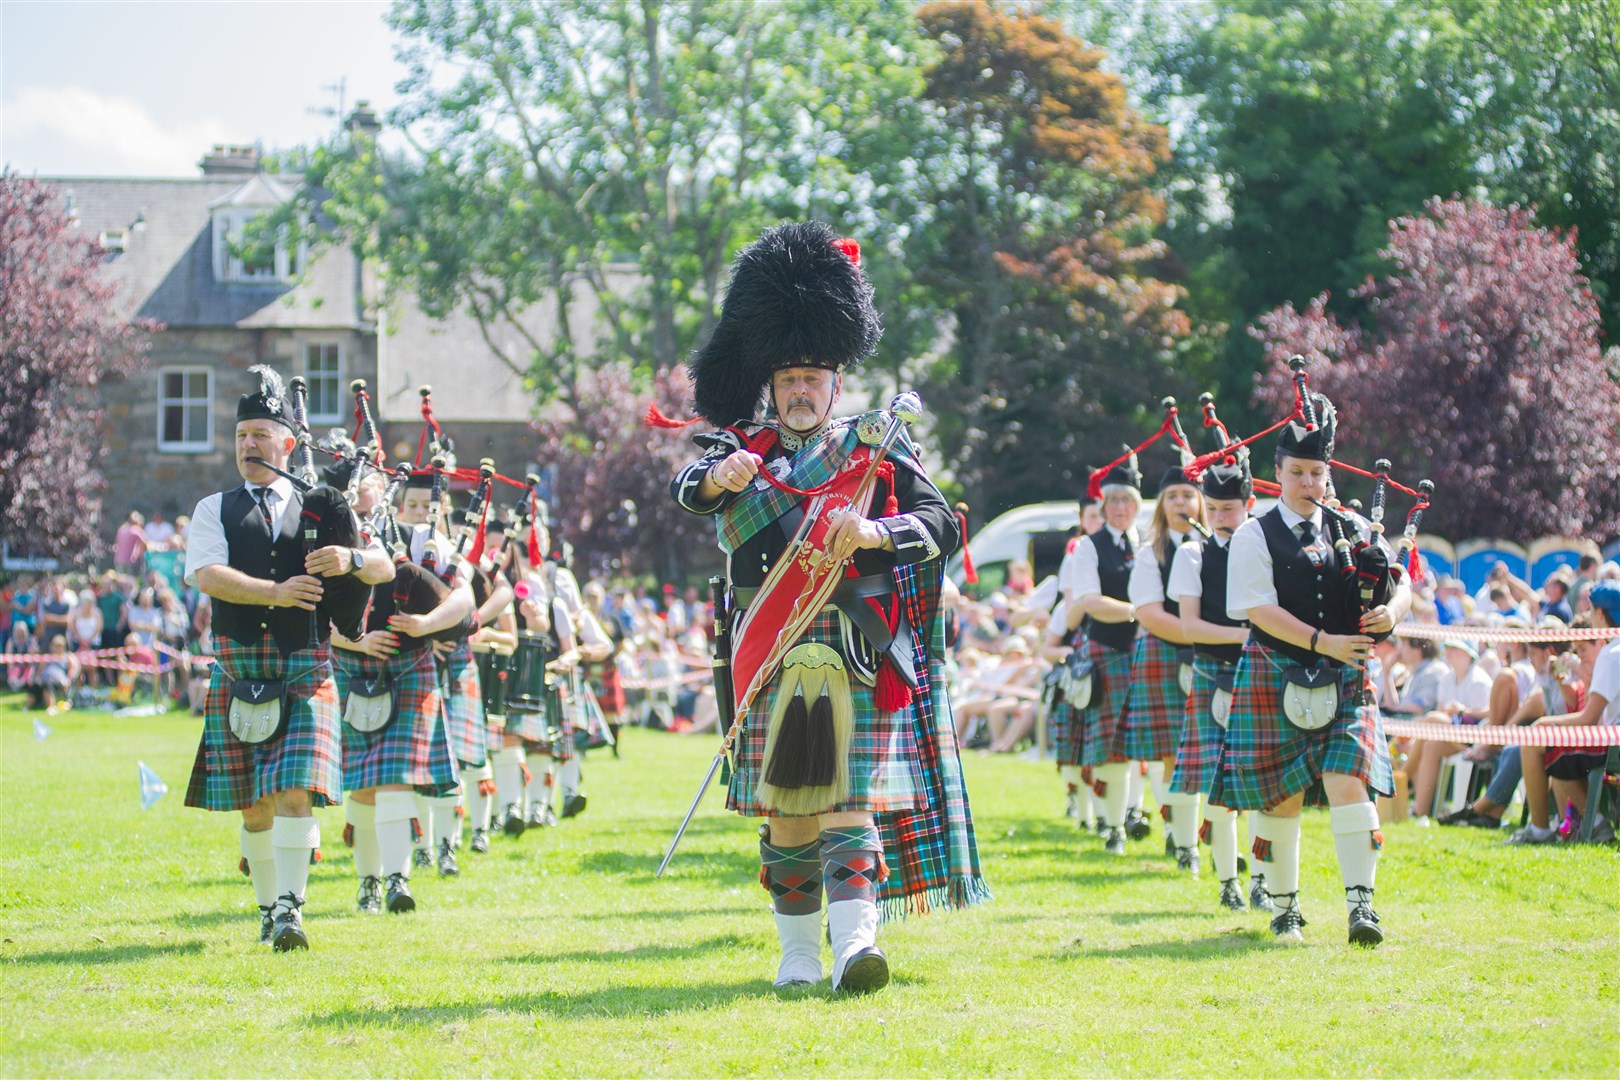 The Strathisla Pipe Band enter the field at the Aberlour Highland Games last year. Picture: Daniel Forsyth.